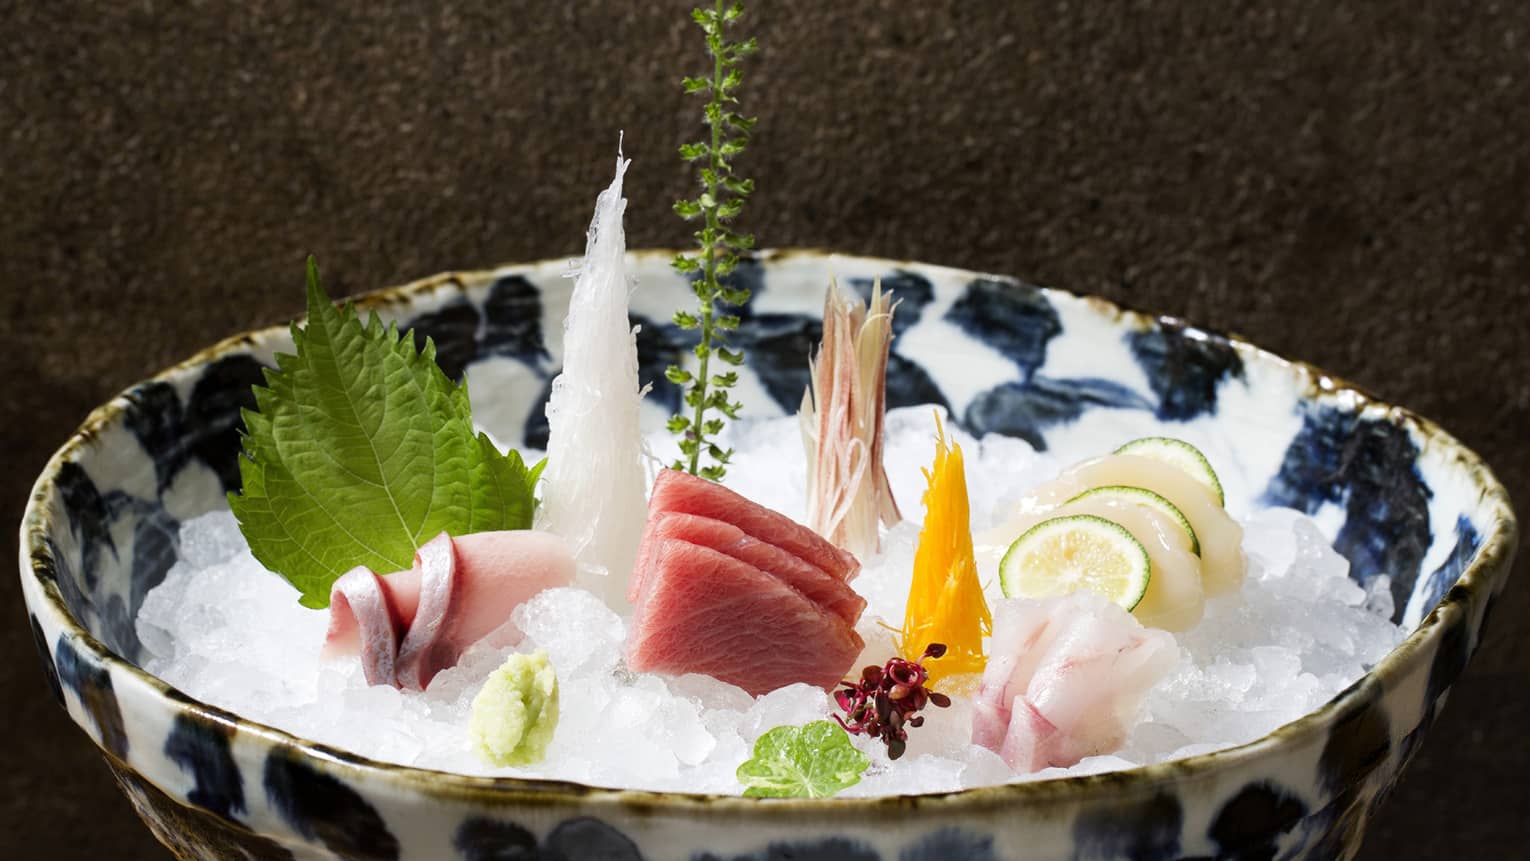 Sashimi Platter from Zuma, served in an blue and white bowl